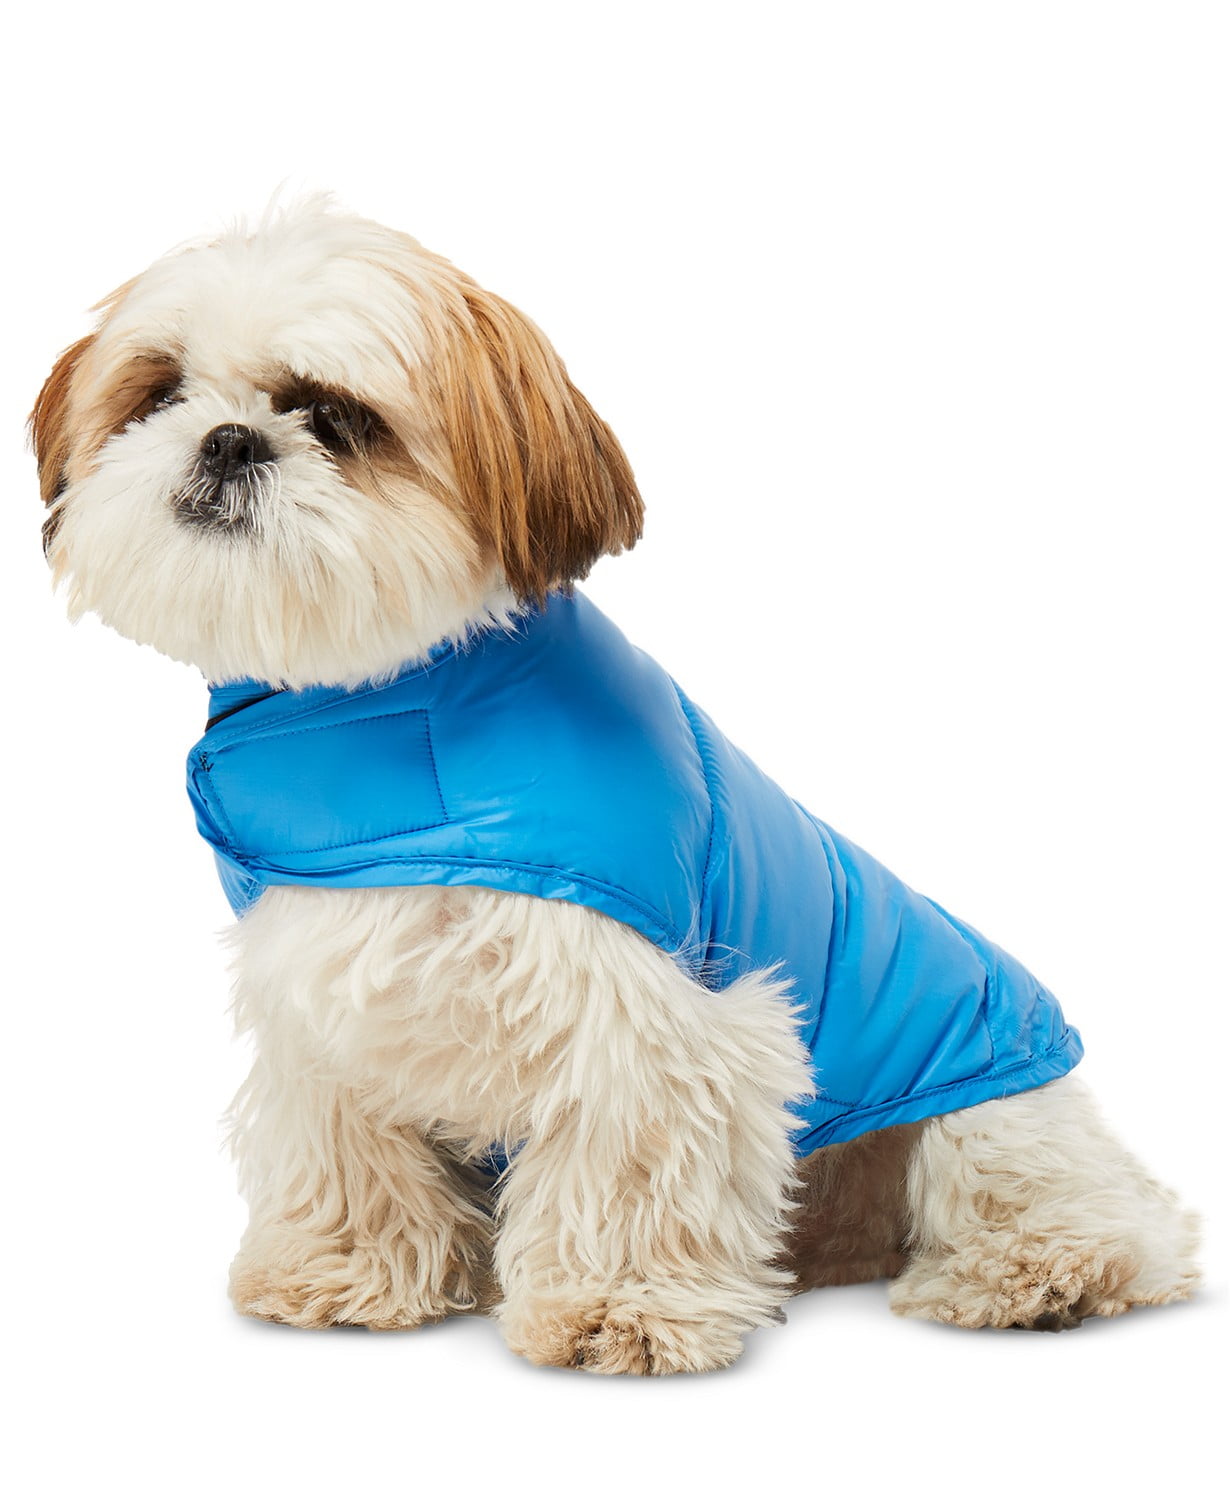 www.couturepoint.com-32-degrees-blue-reversible-down-puffer-dog-coat-jacket